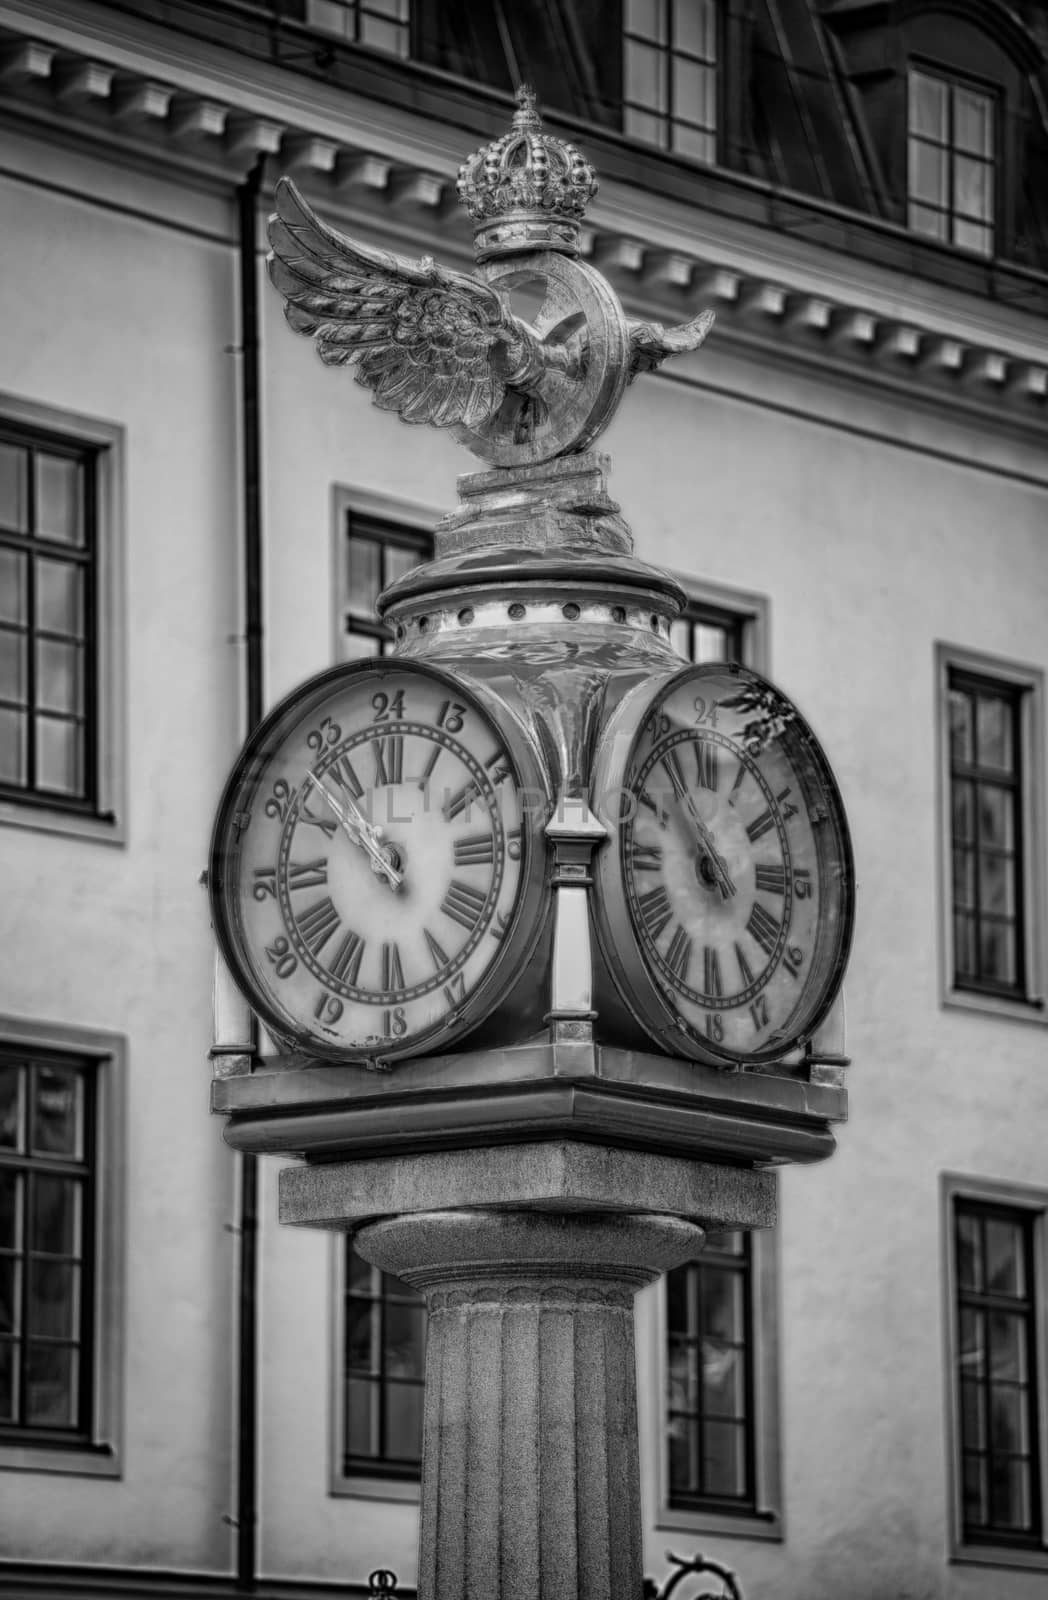 Klocka Central Plan, Clock with Crown next to the central train station in Stockholm, Sweden

